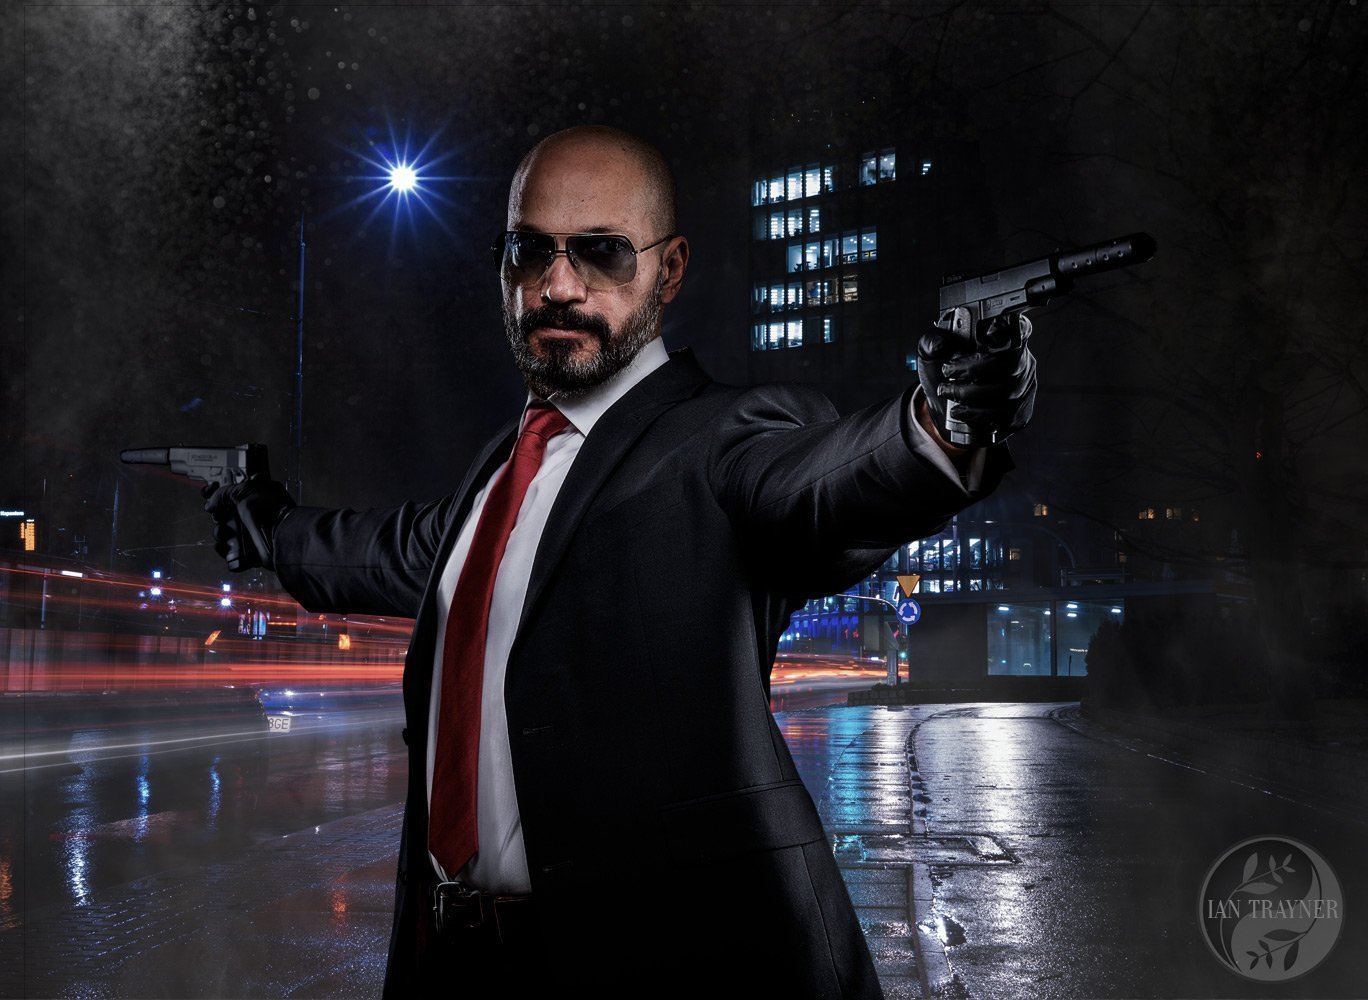 "Hitman" inspired photographic composite, with actor Kevin Mangar. Photography by Ian Trayner.